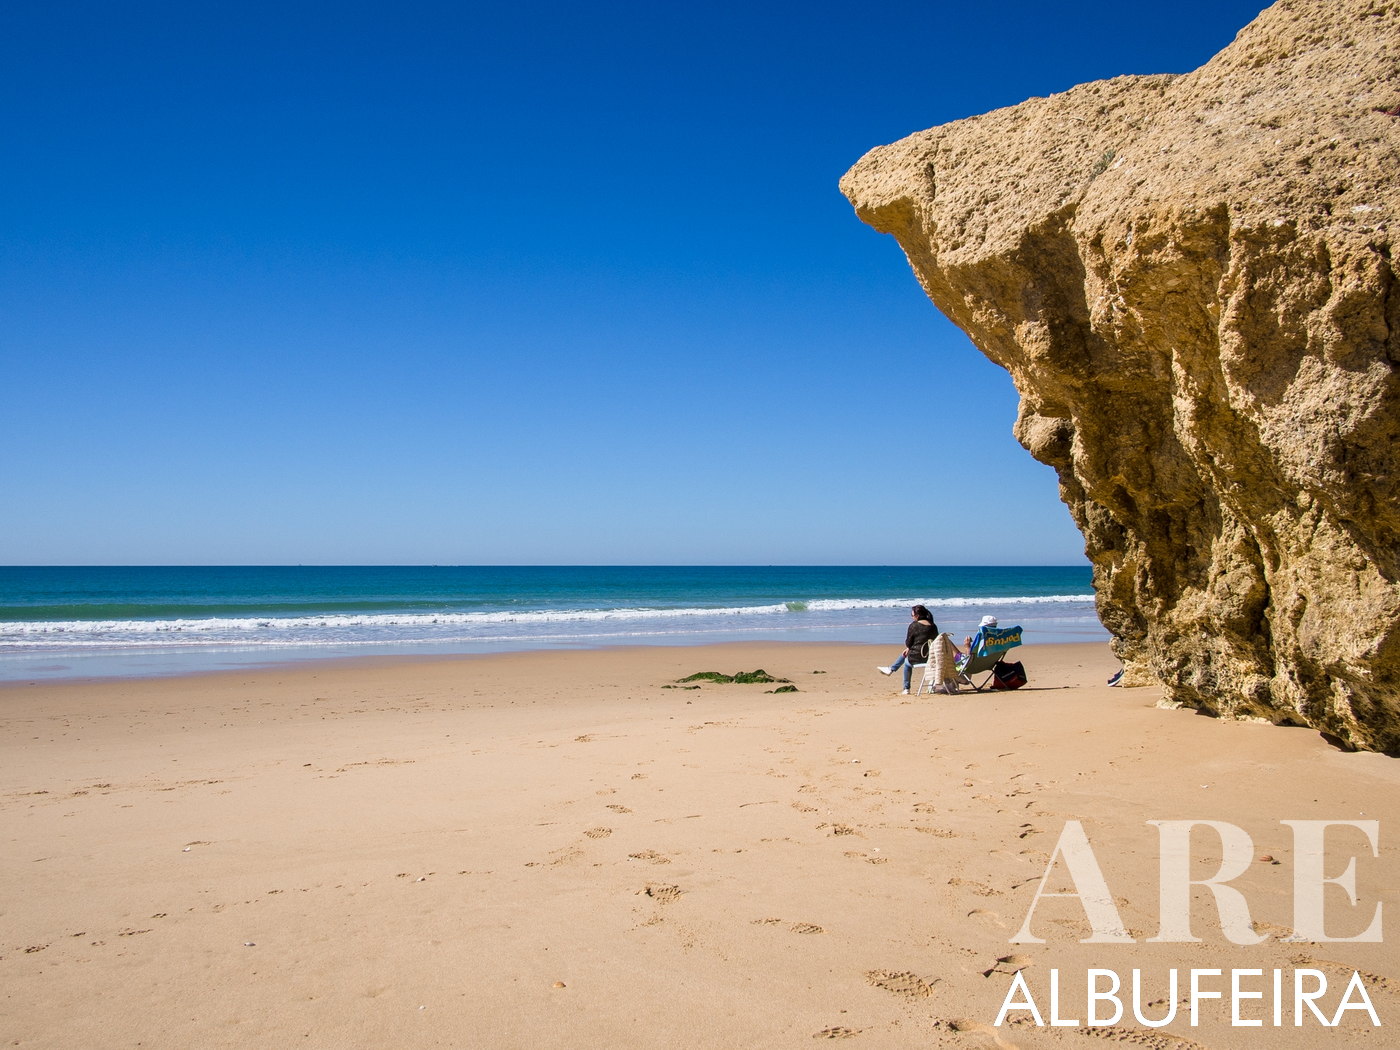 Captivating scene at Praia da Galé in March. An imposing limestone rock formation on the right perfectly complements the clear blue skies, creating an eye-catching image.